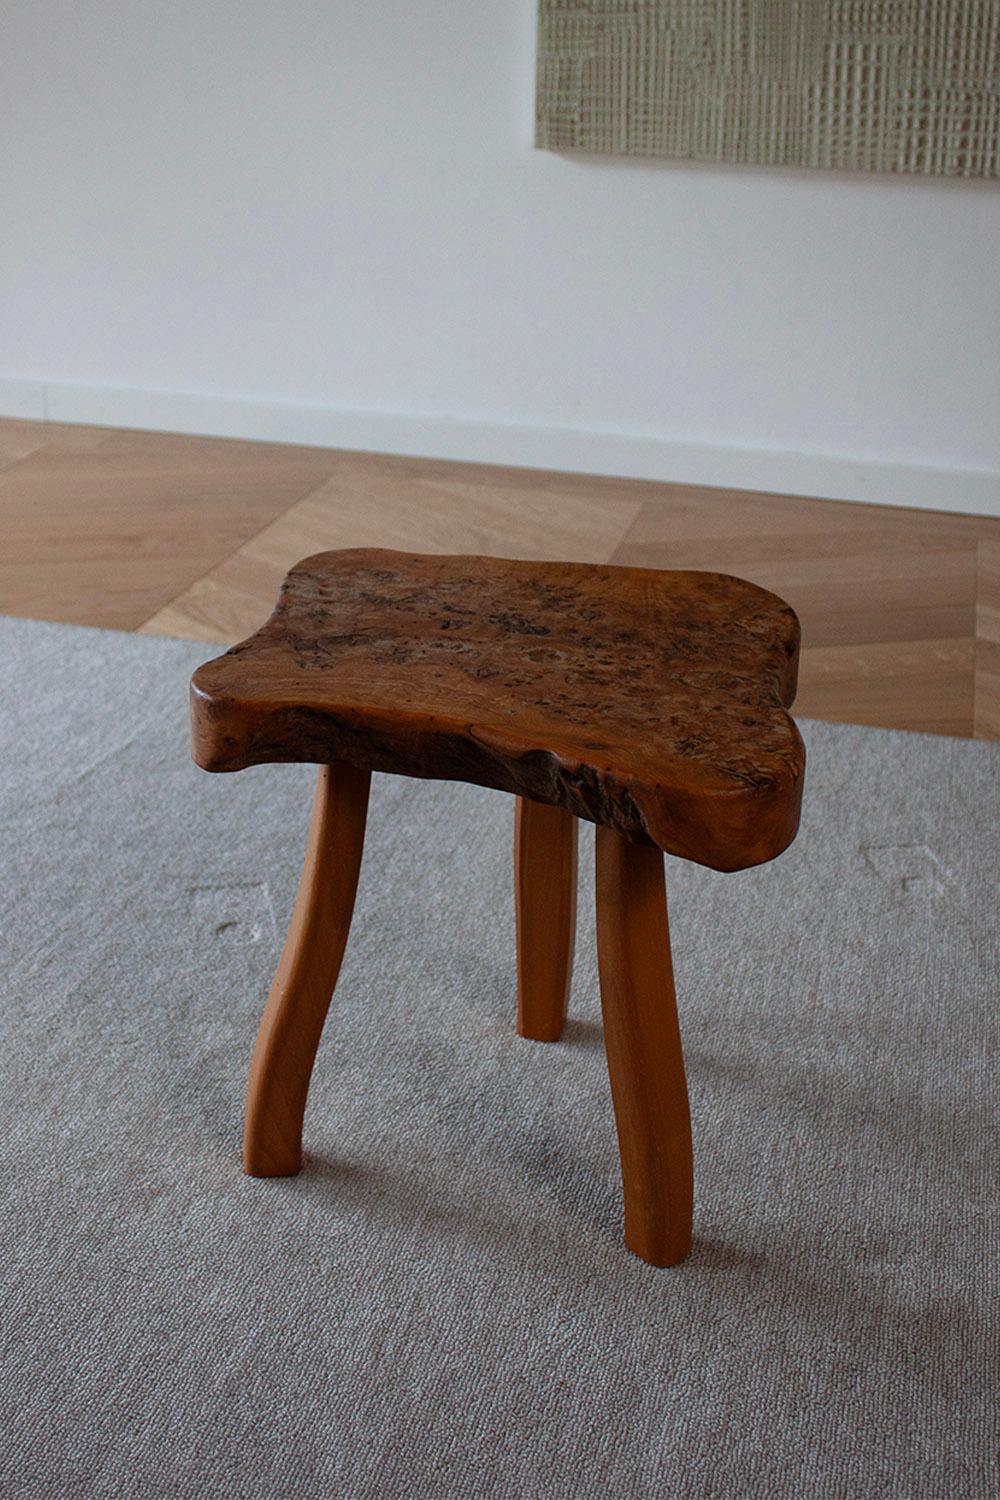 Primitive French hand carved Burl wood Three Legged Stool (2 of 4)